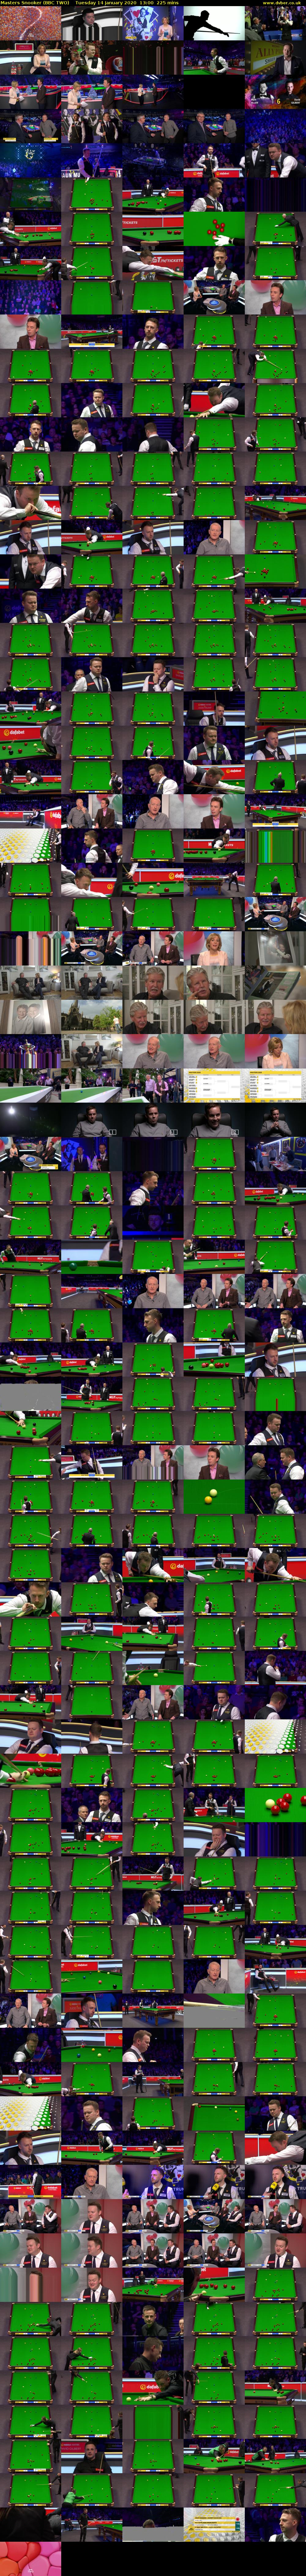 Masters Snooker (BBC TWO) Tuesday 14 January 2020 13:00 - 16:45